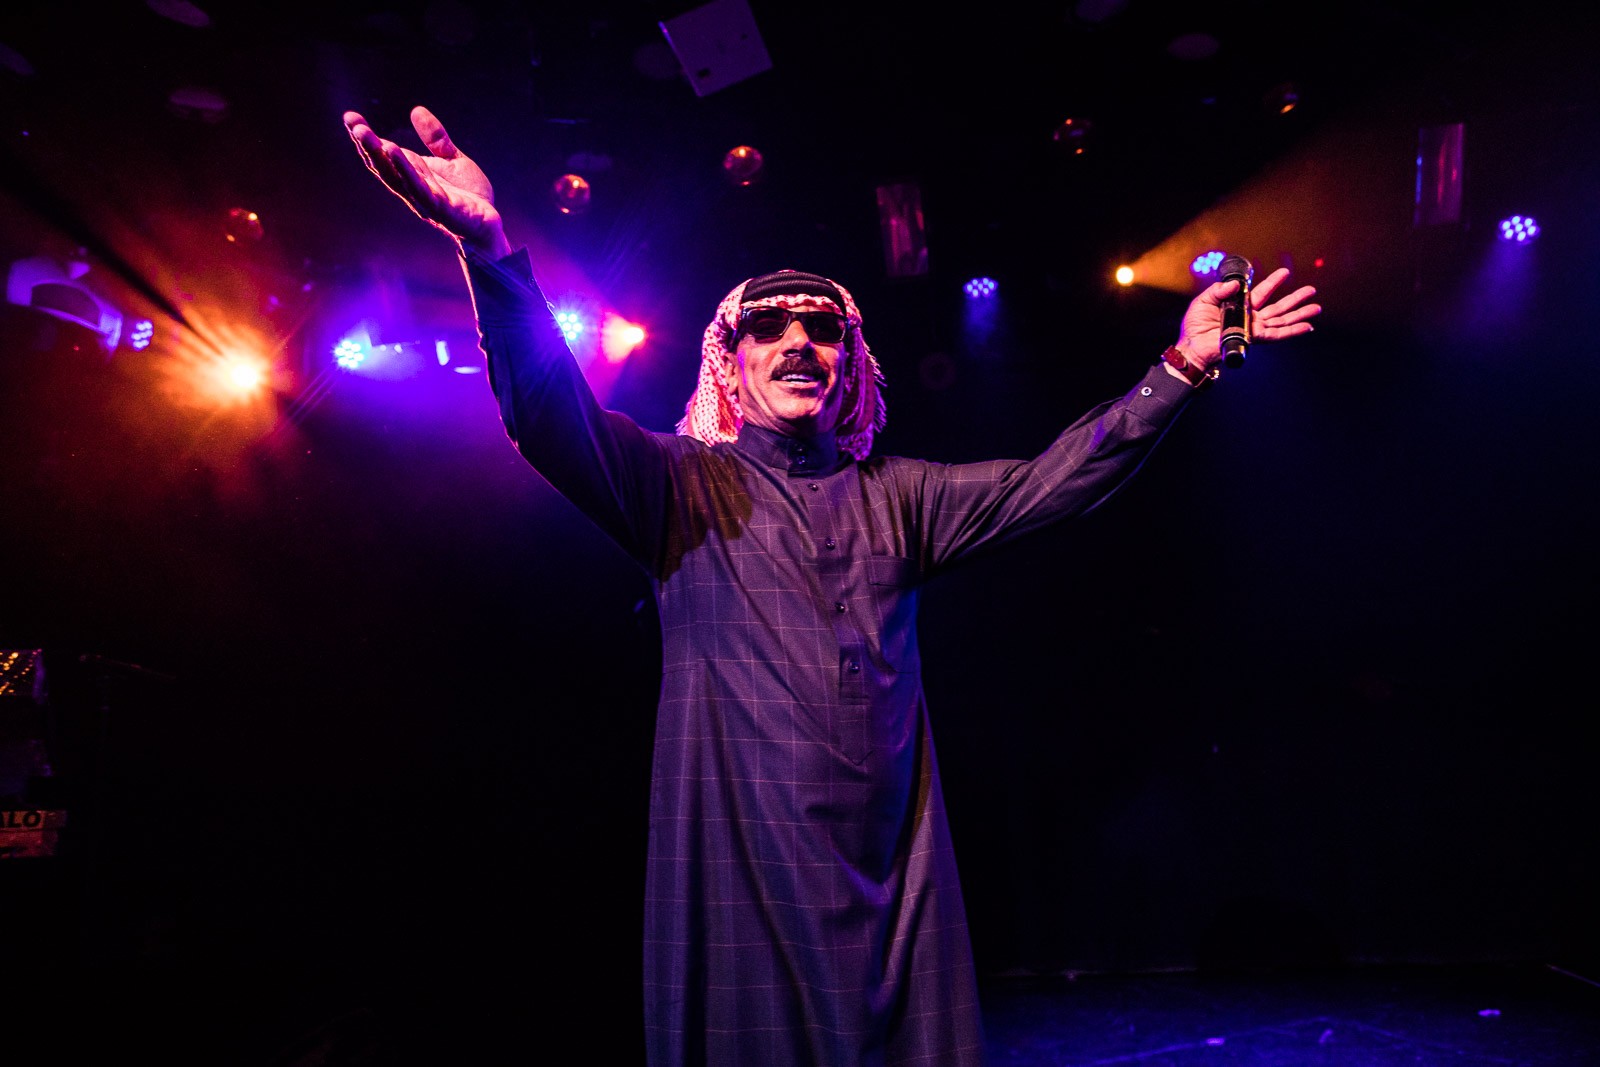 Omar Souleyman at Le Poisson Rouge